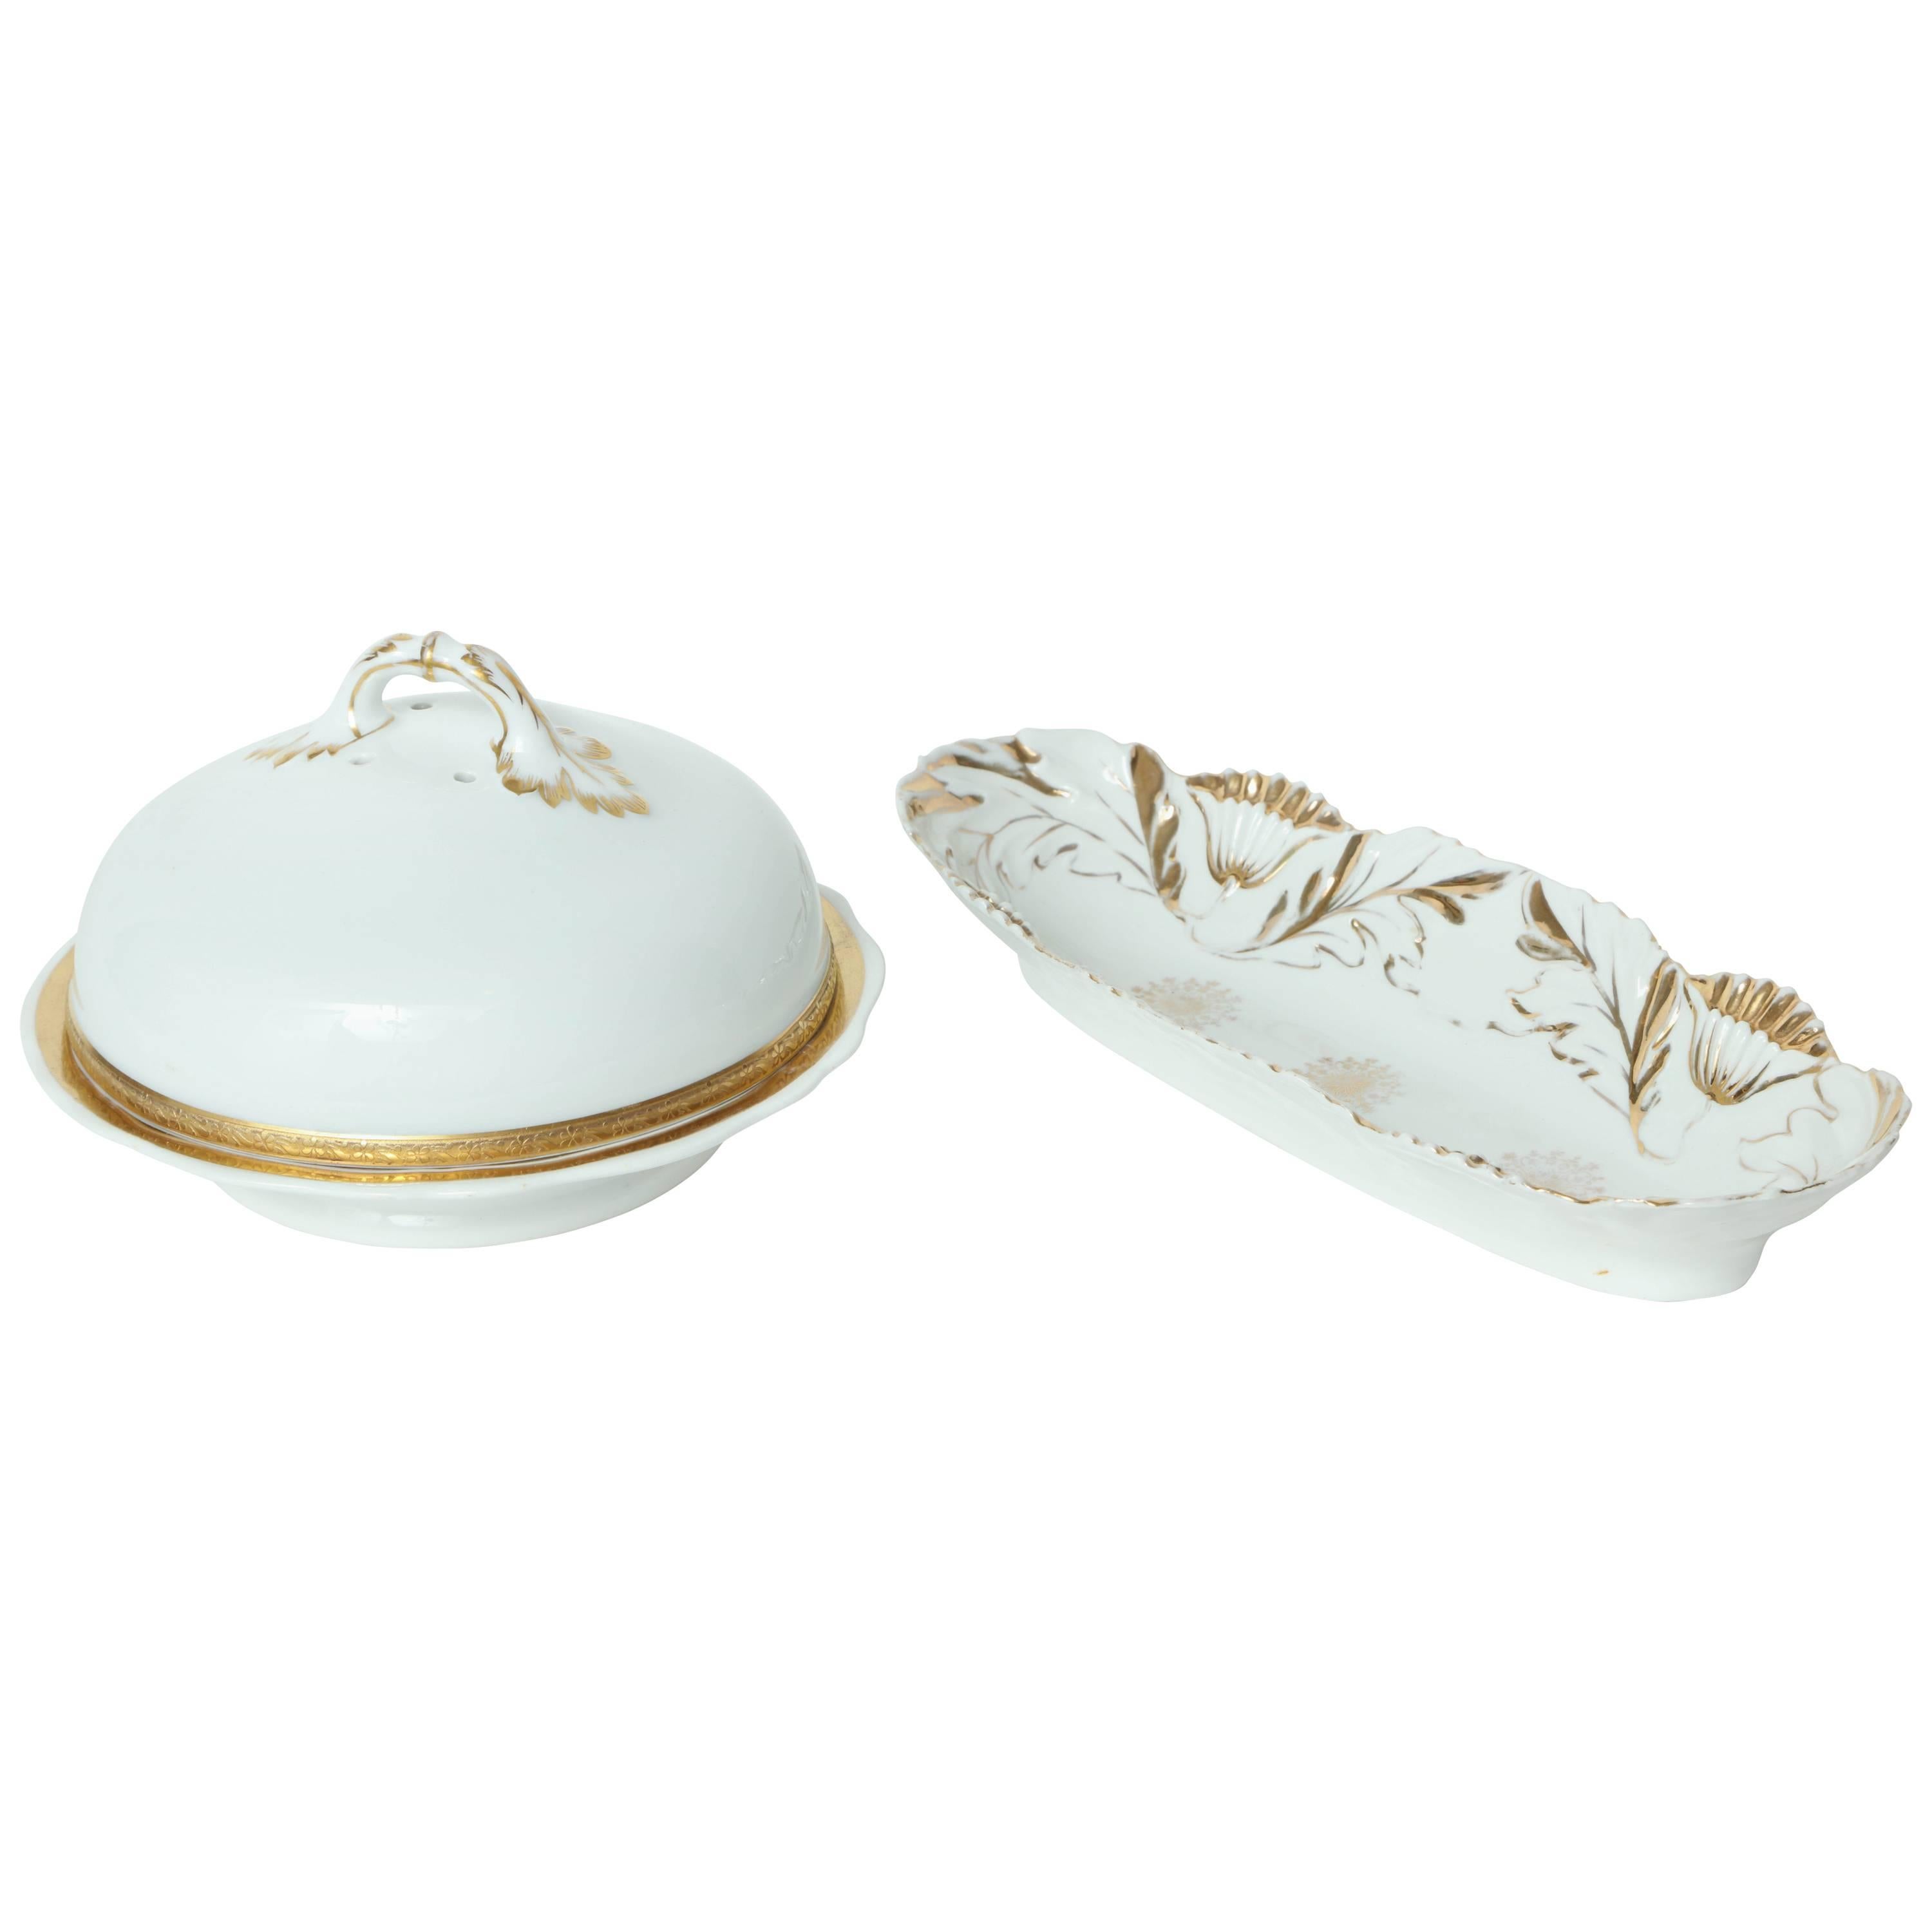 French Porcelain Covered Cheese/ Butter Server and Oblong Dish